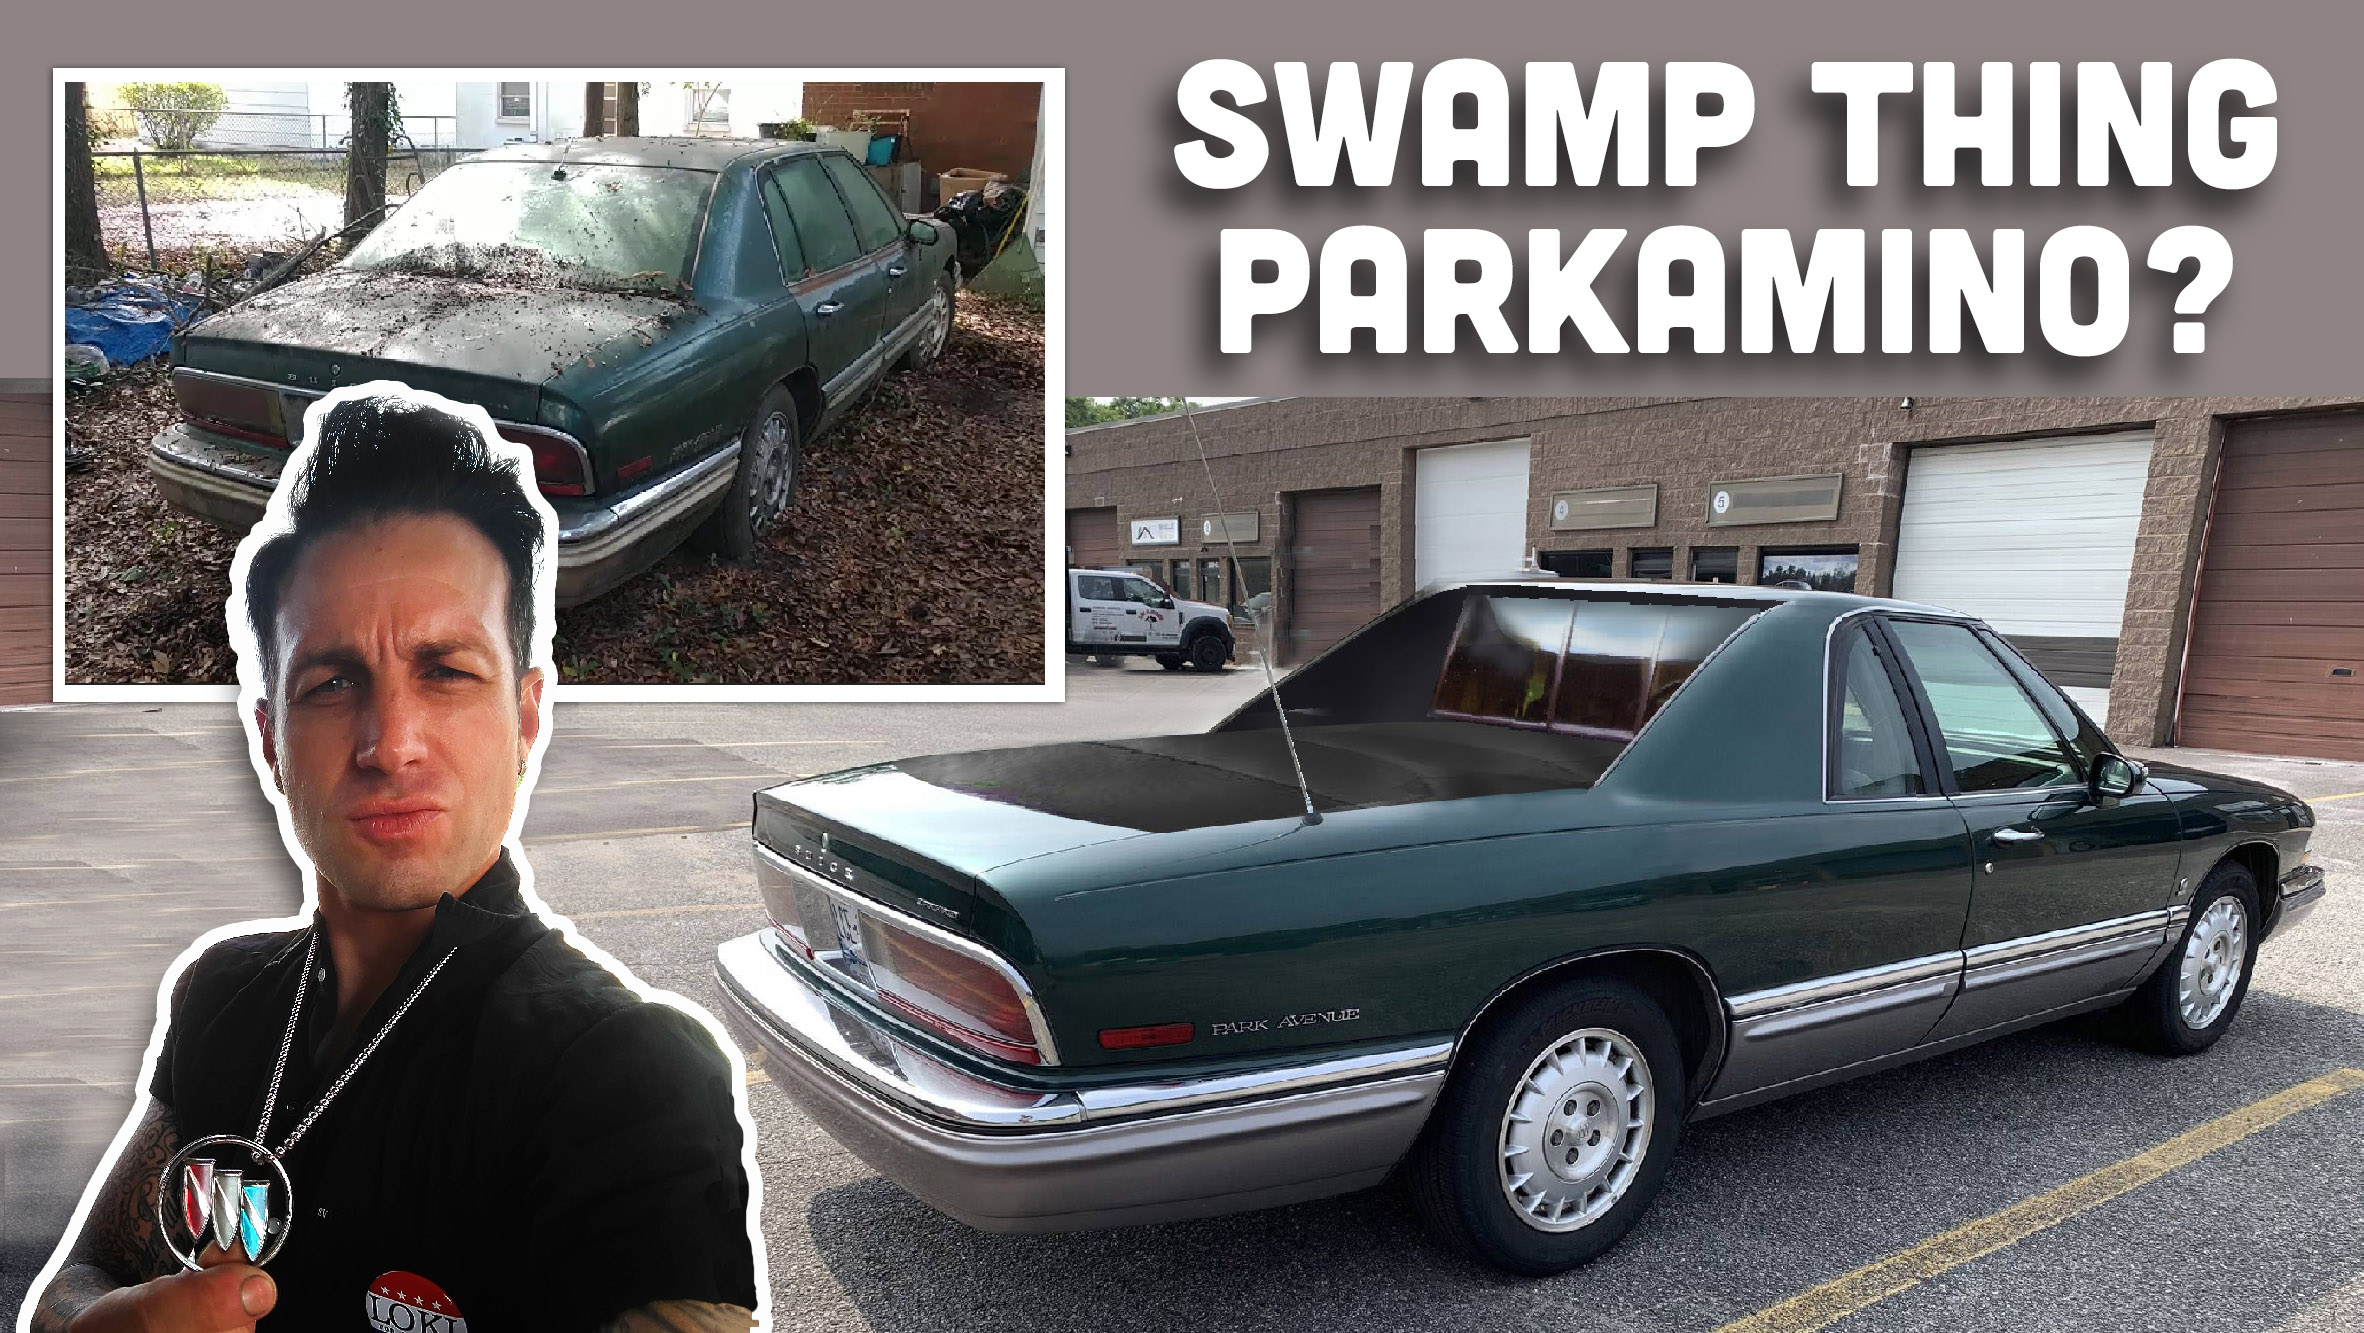 1991 Buick Park Avenue: Analyzing Problems and Complaints